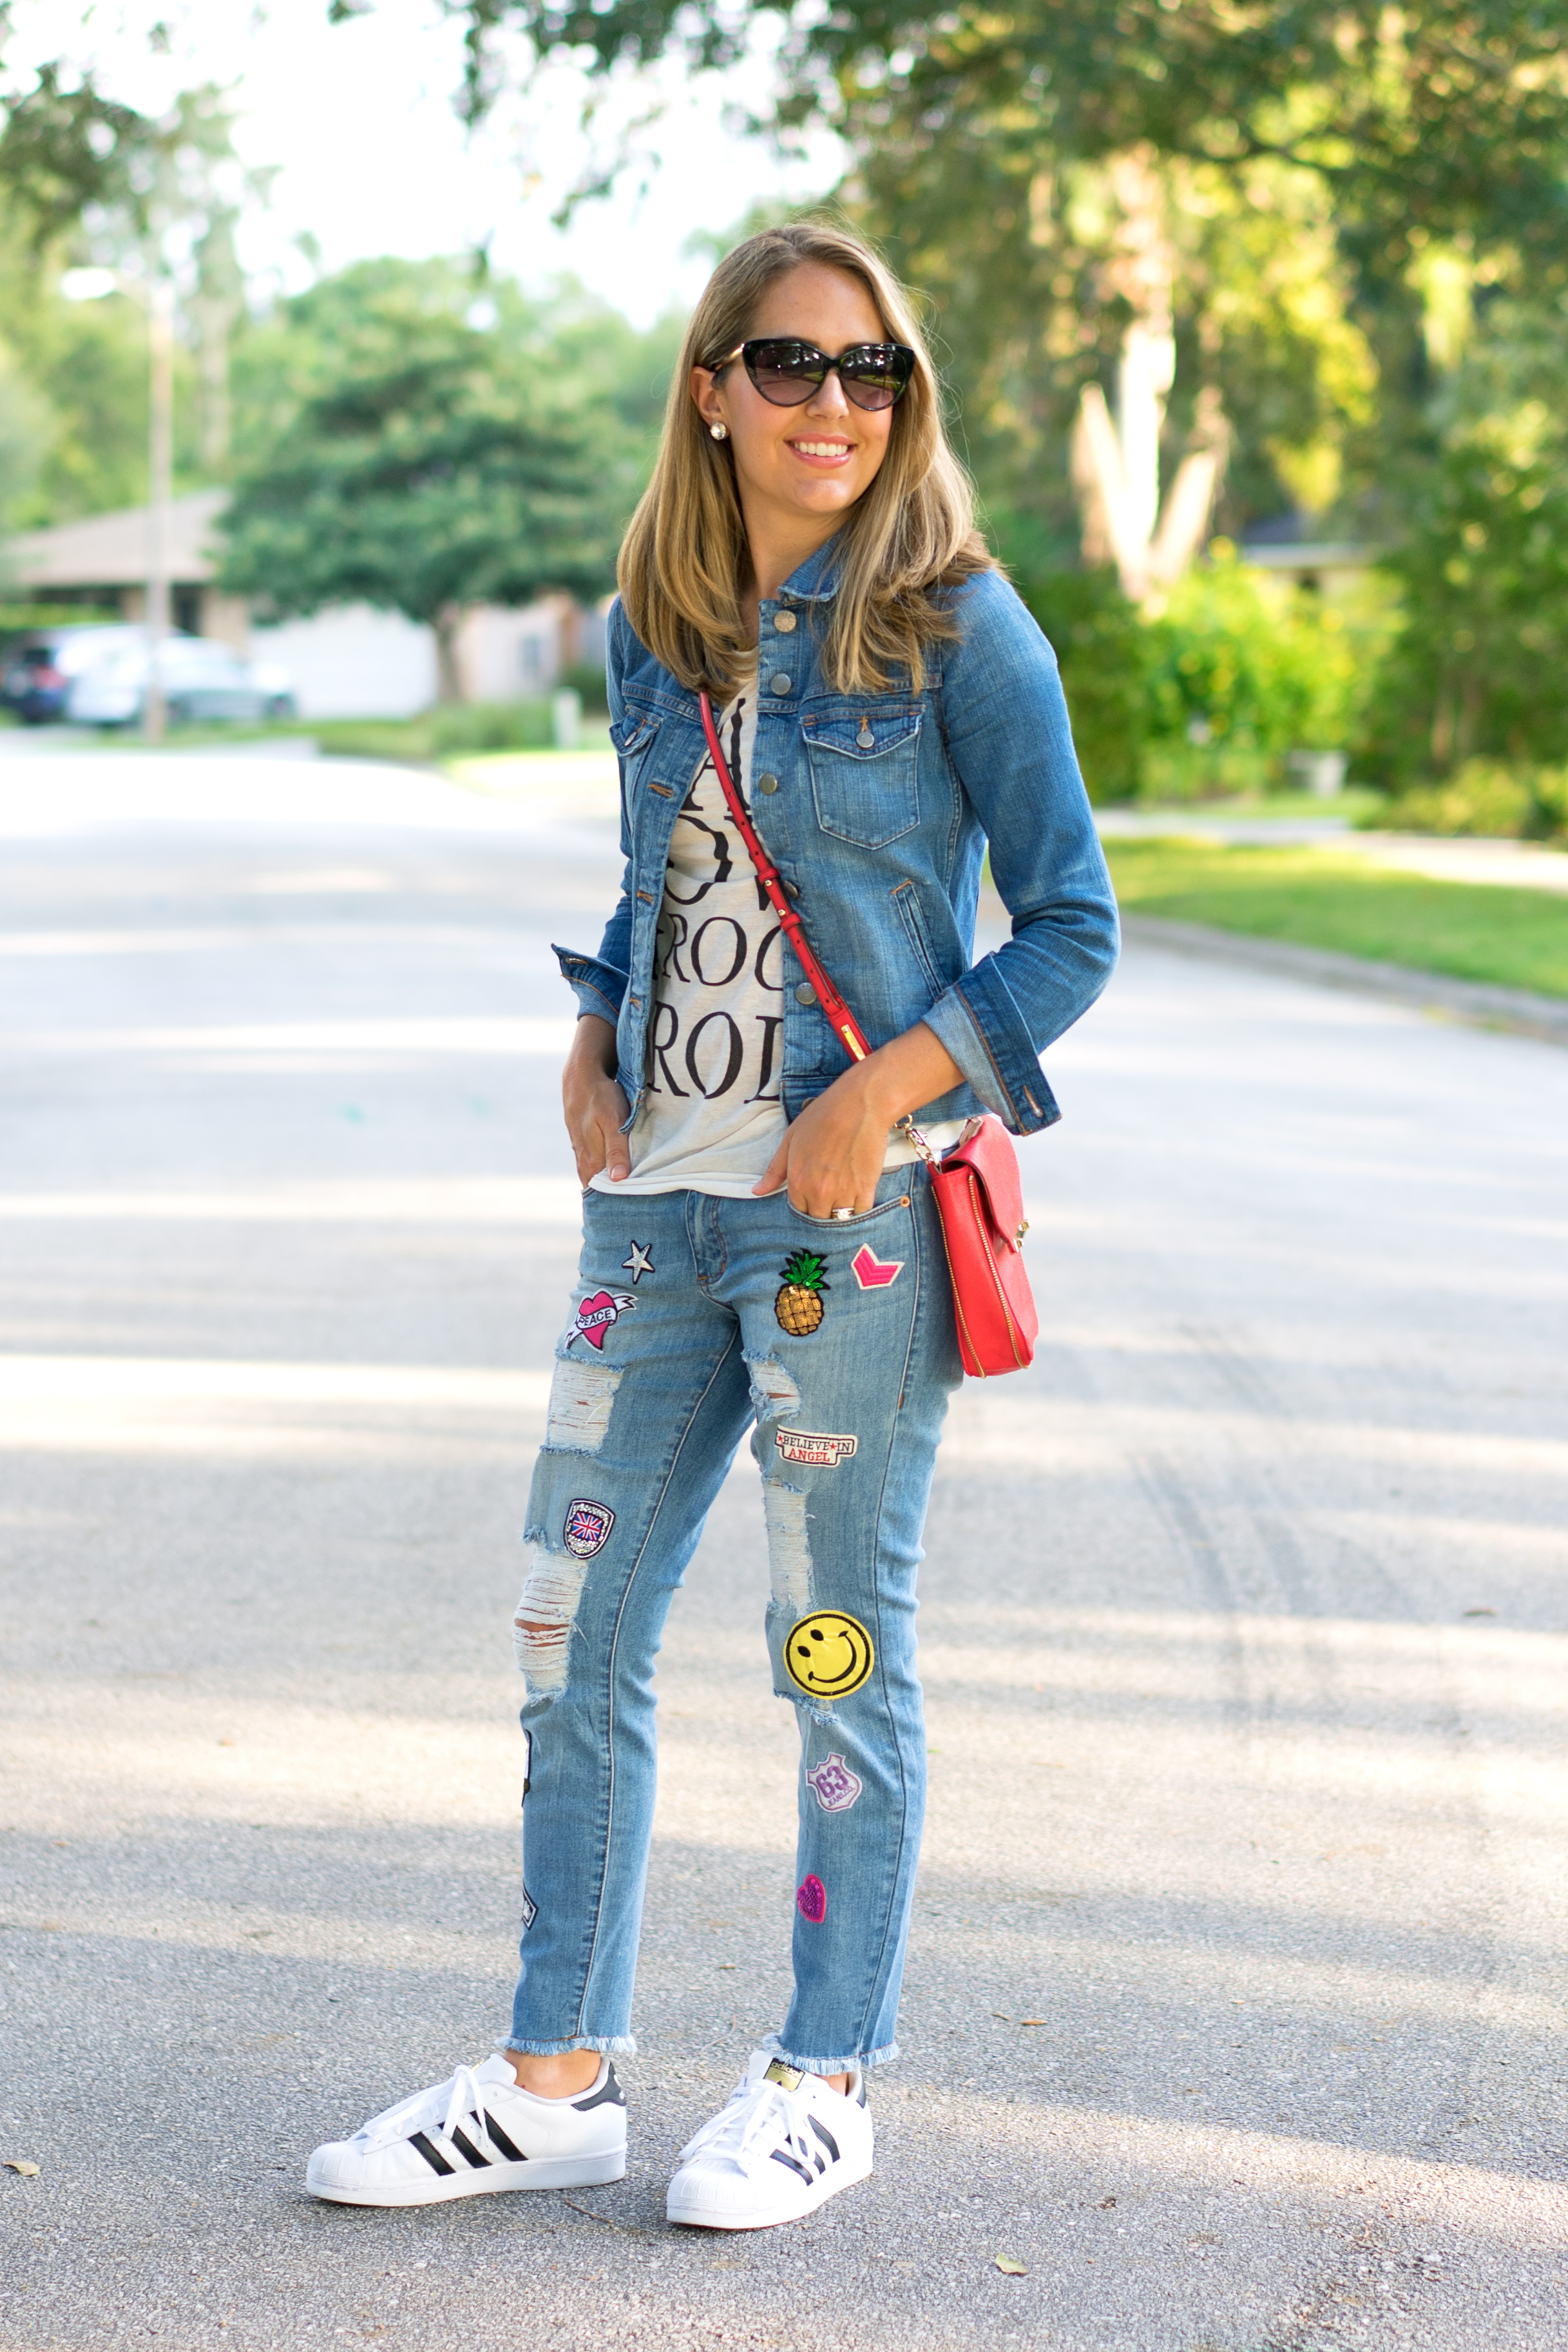 Today's Everyday Fashion: Patch Jeans — J's Everyday Fashion